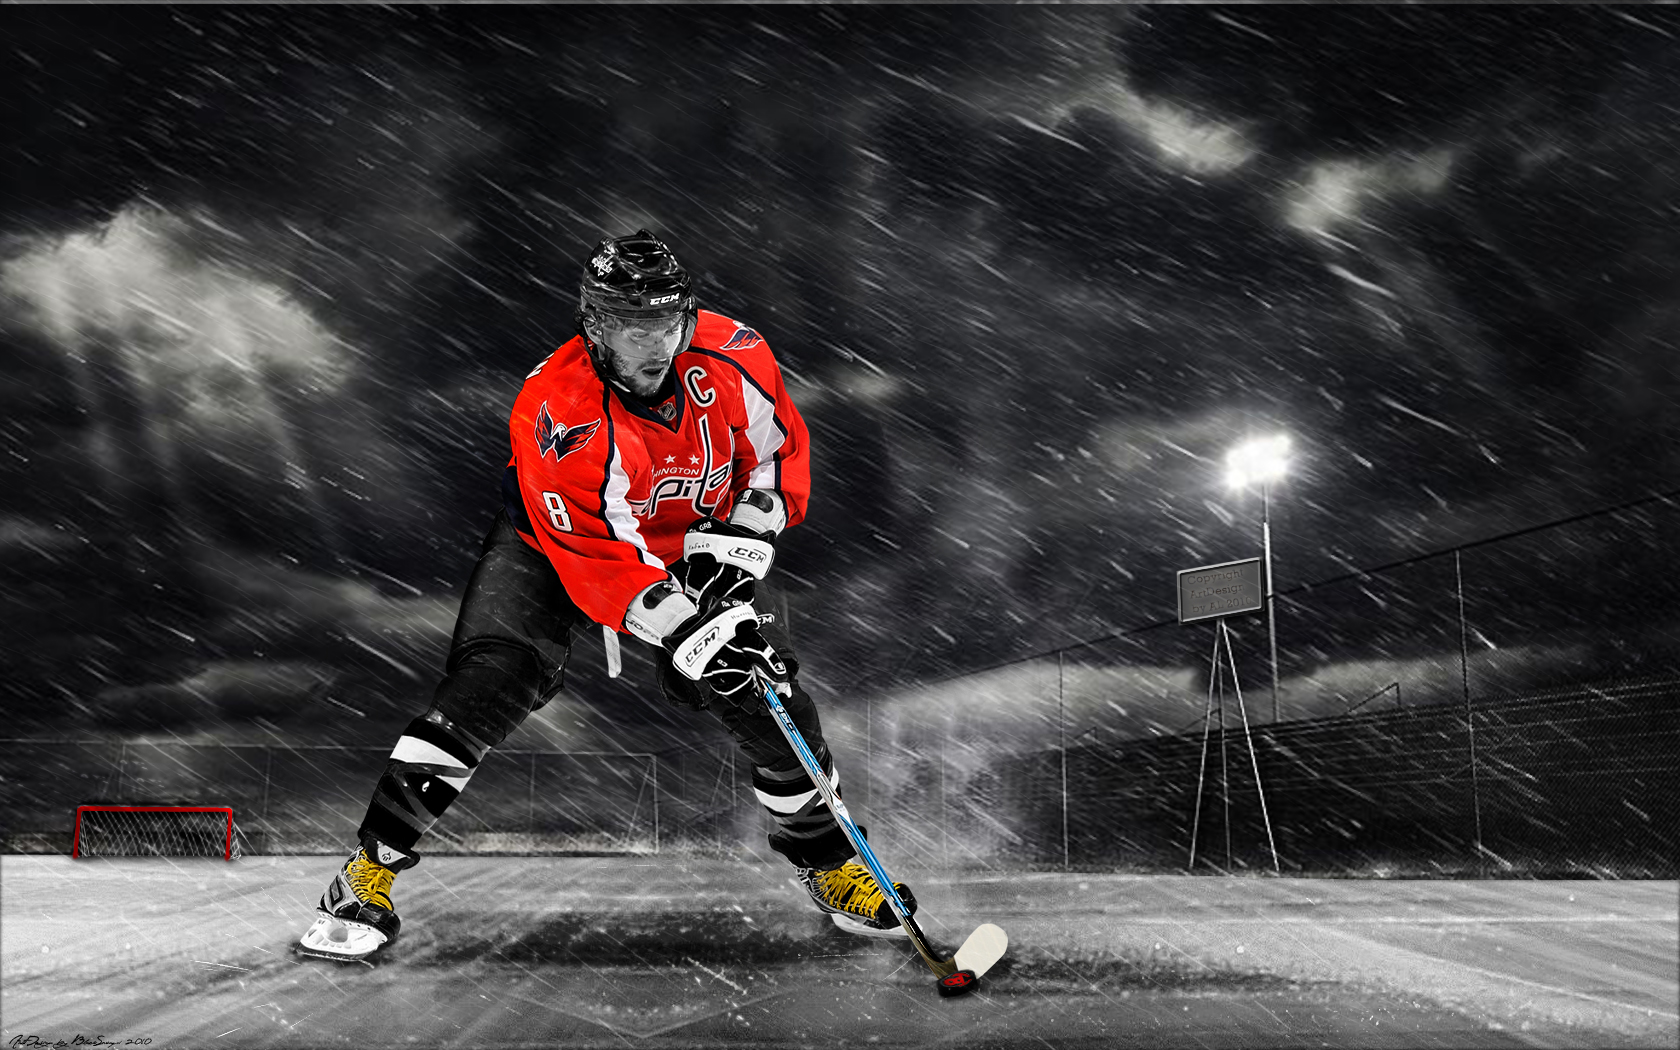 Download wallpapers Alexander Ovechkin 4k Russian hockey player art  portrait face NHL paint art splashes of paint Washington Capitals  Captain USA National Hockey League Alex Ovechkin for desktop with  resolution 3840x2400 High